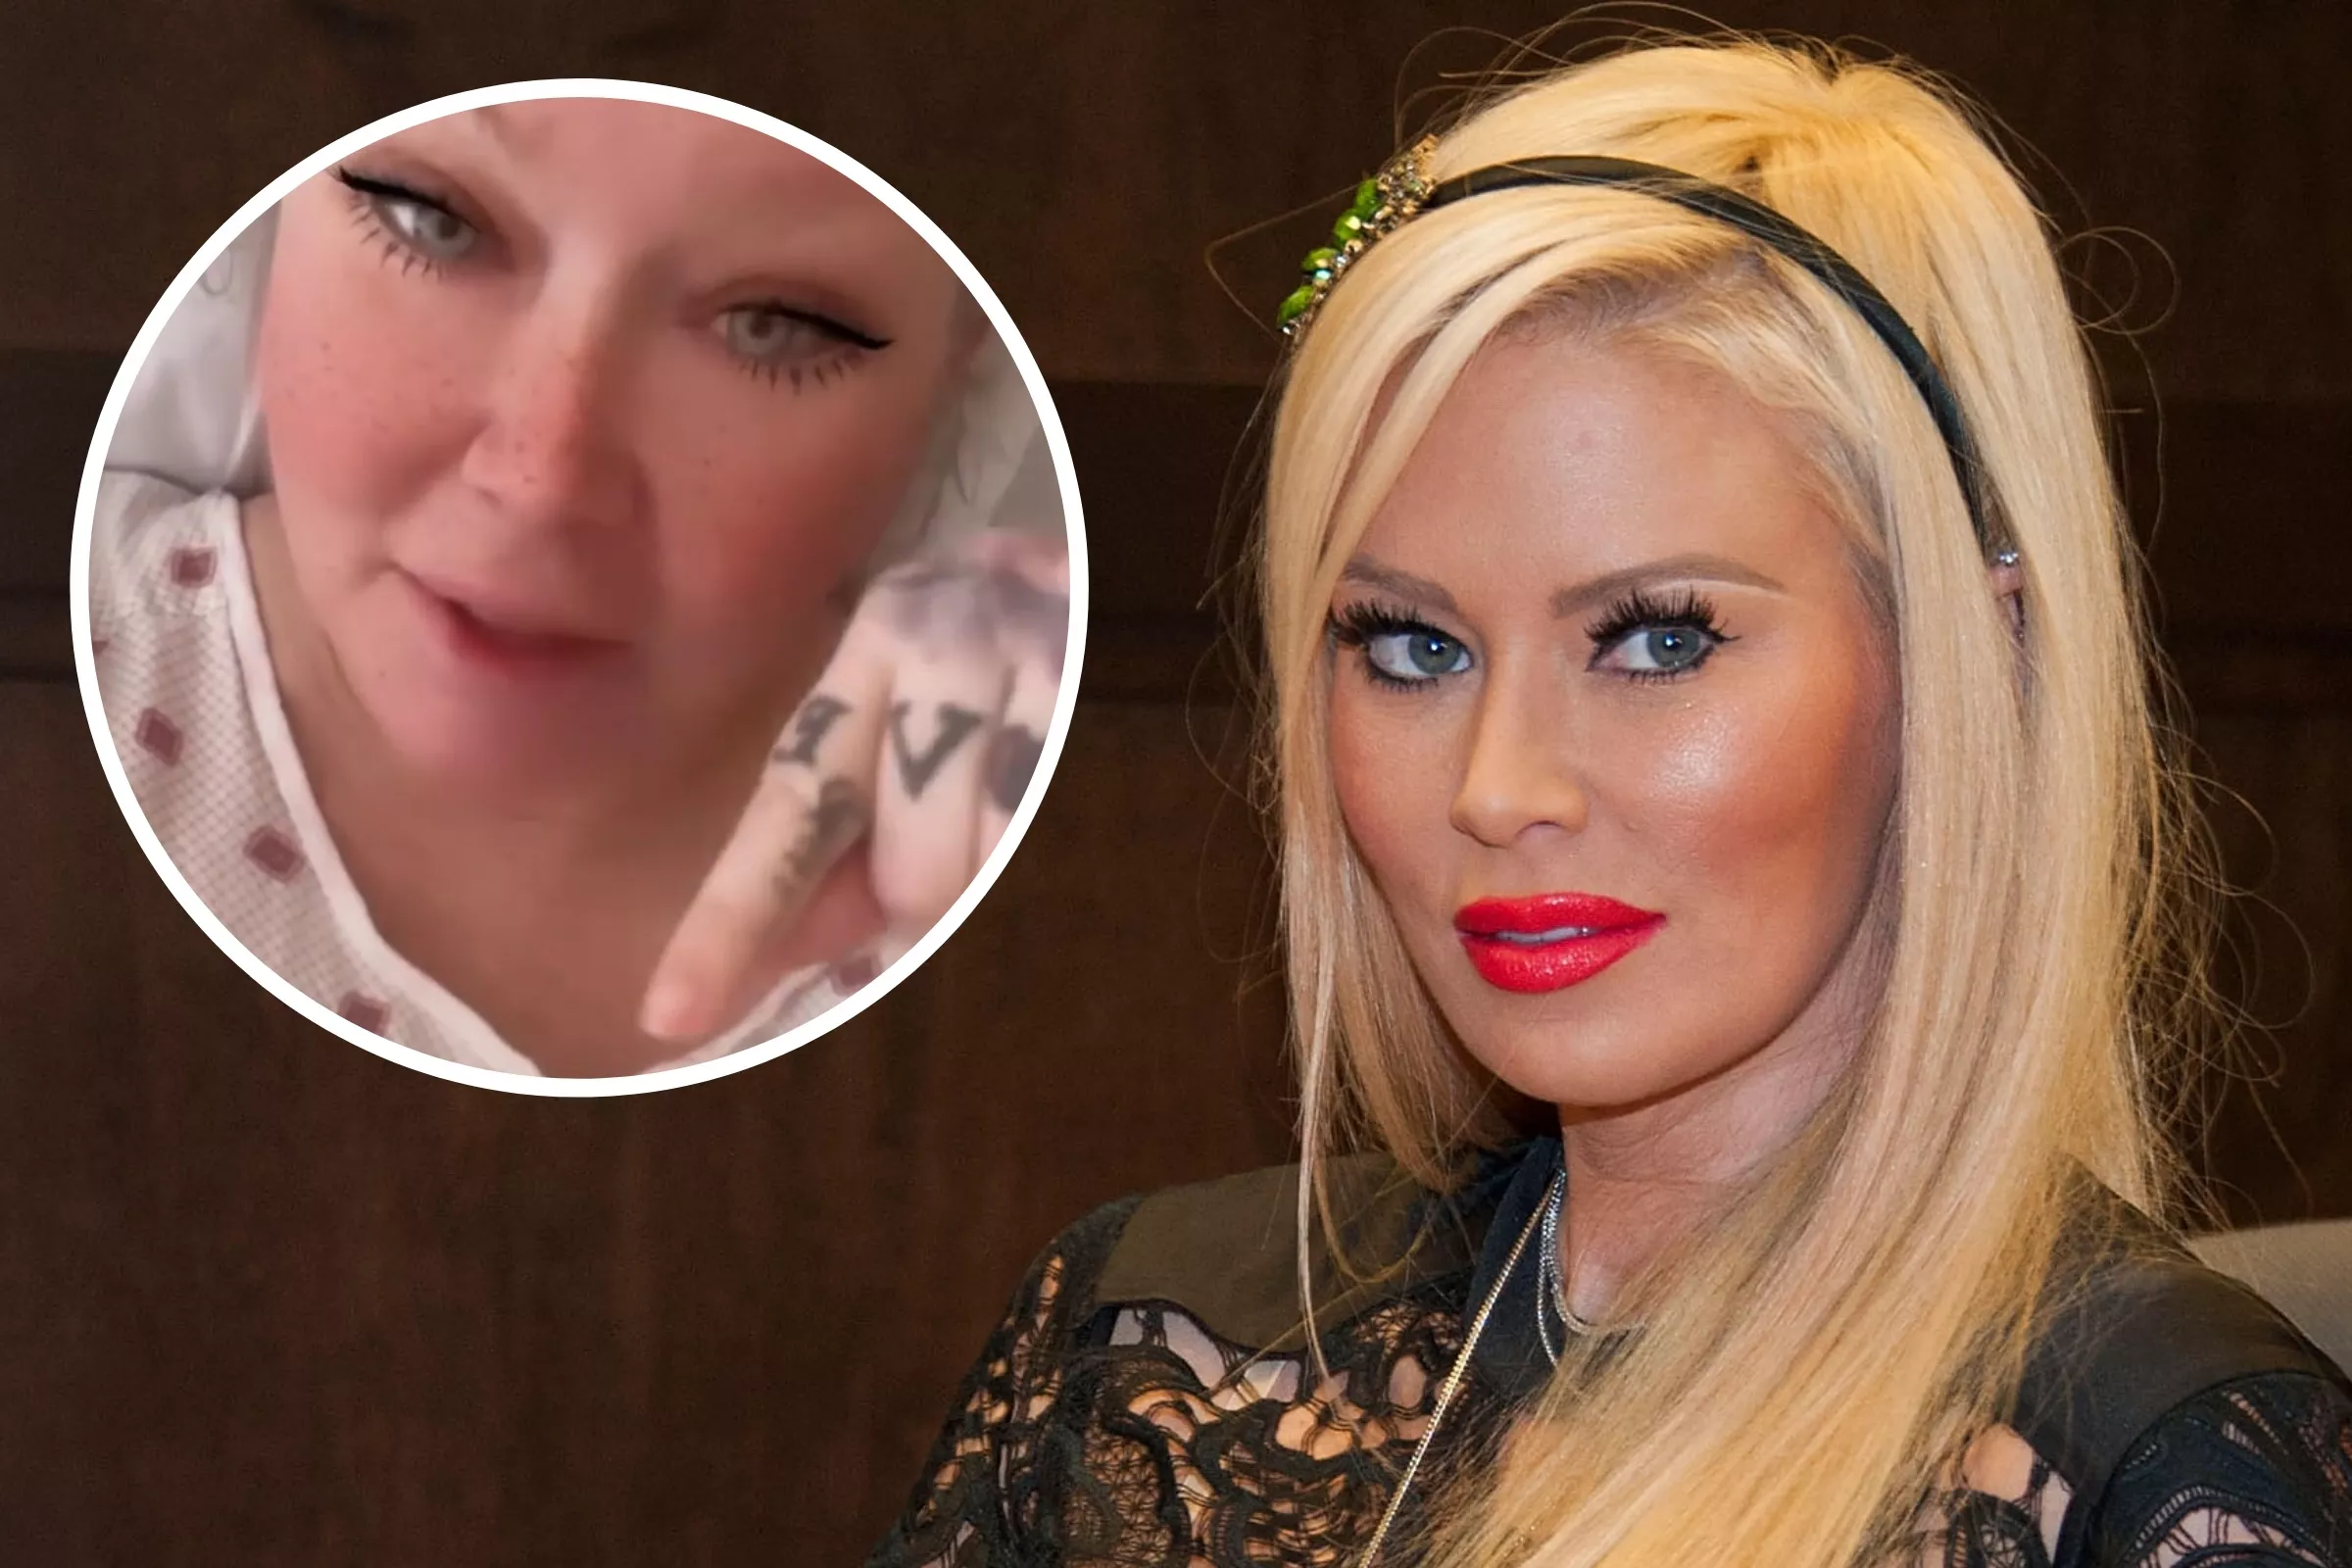 diana leatherman recommends jenna jameson close up pic